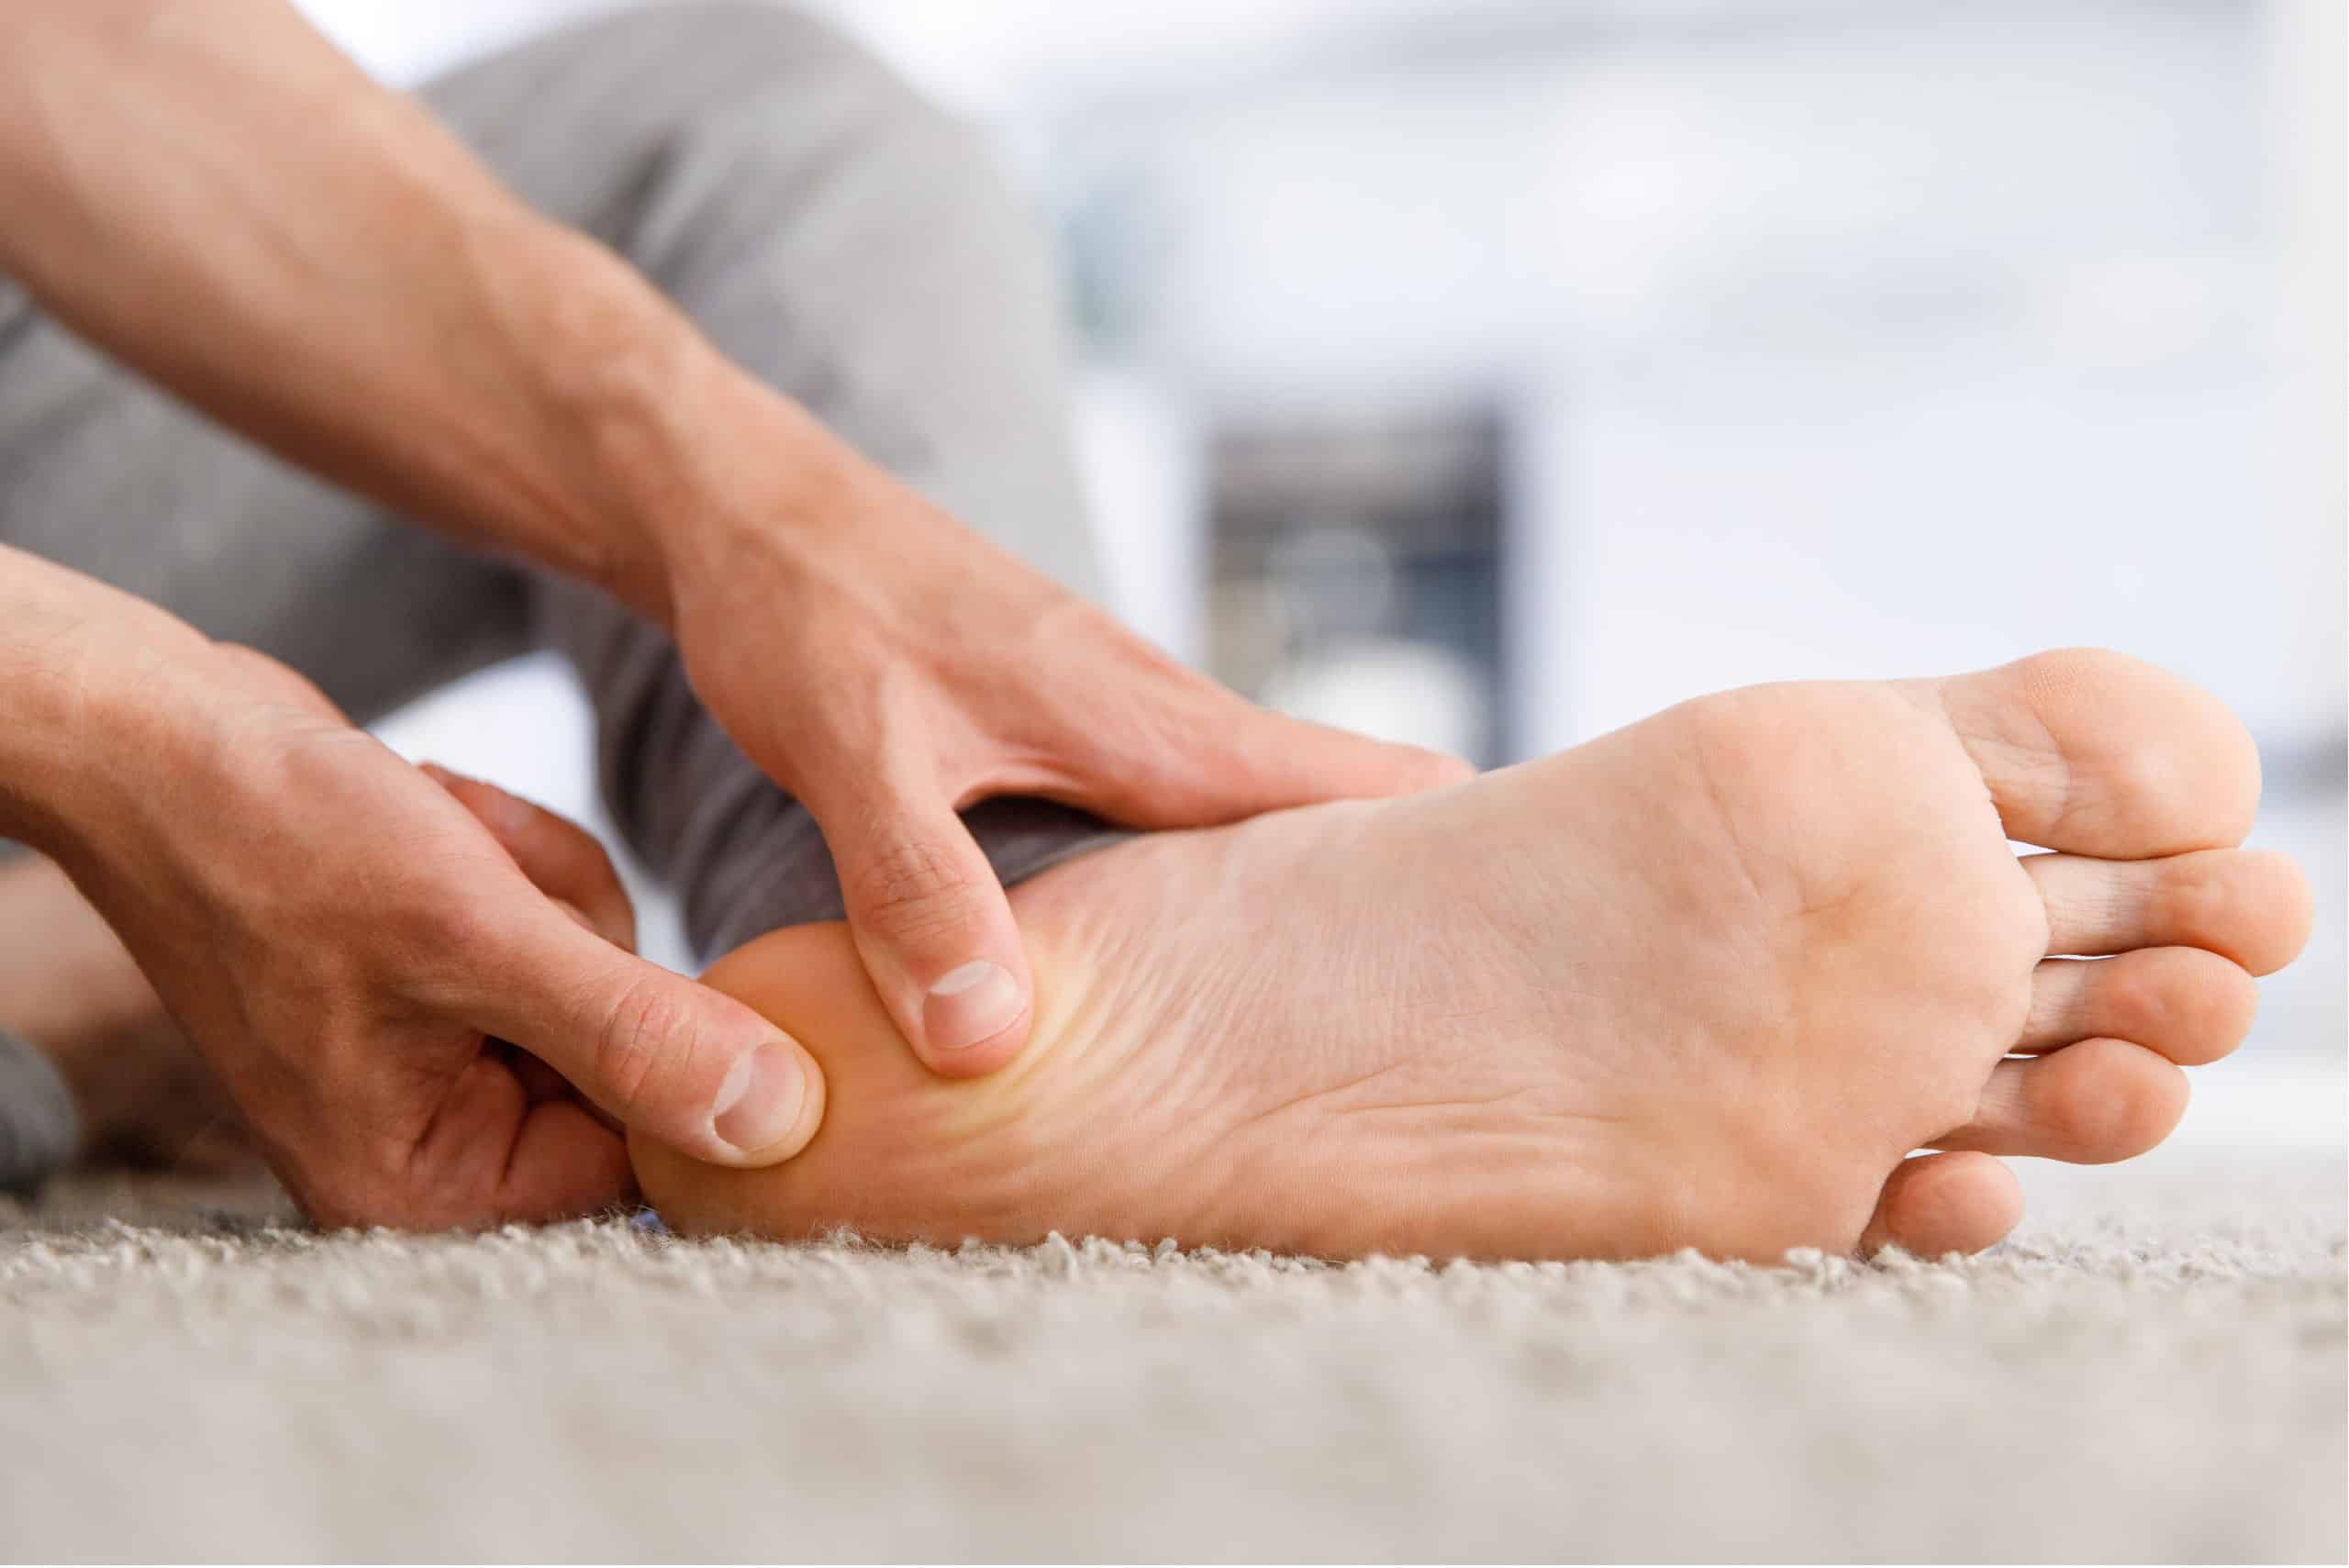 Foot, Ankle & Heel Pain | Podiatric Medicine and Surgery, Sports Medicine,  Wound Care & Foot and Ankle Surgery located in Waterbury and Newtown, CT |  Performance Foot & Ankle Specialists, LLC